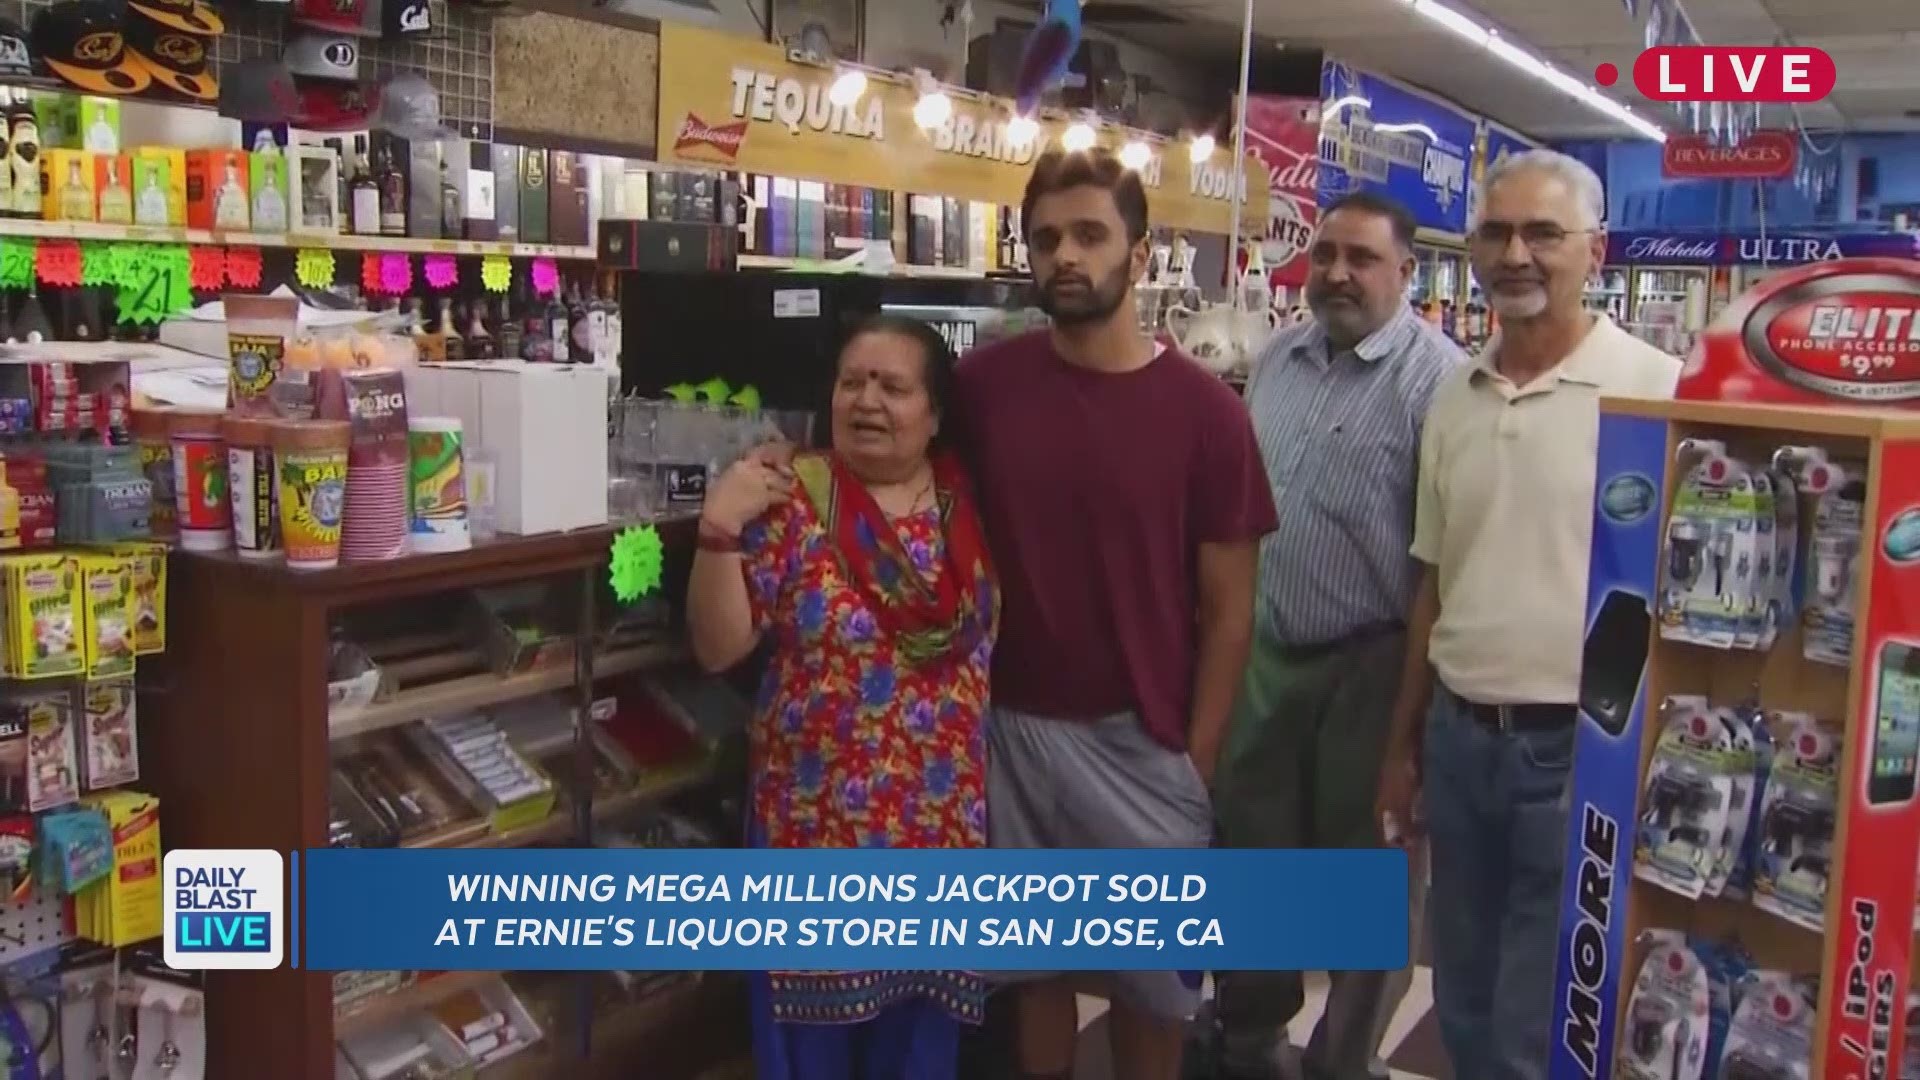 A lucky lottery player in San Jose matched all 6 numbers to win $522 million. The ticket was sold at Ernie's Liquors with the California Lottery and Daily Blast LIVE got to speak with the liquor store owner about his own $1 million dollar reward for selli